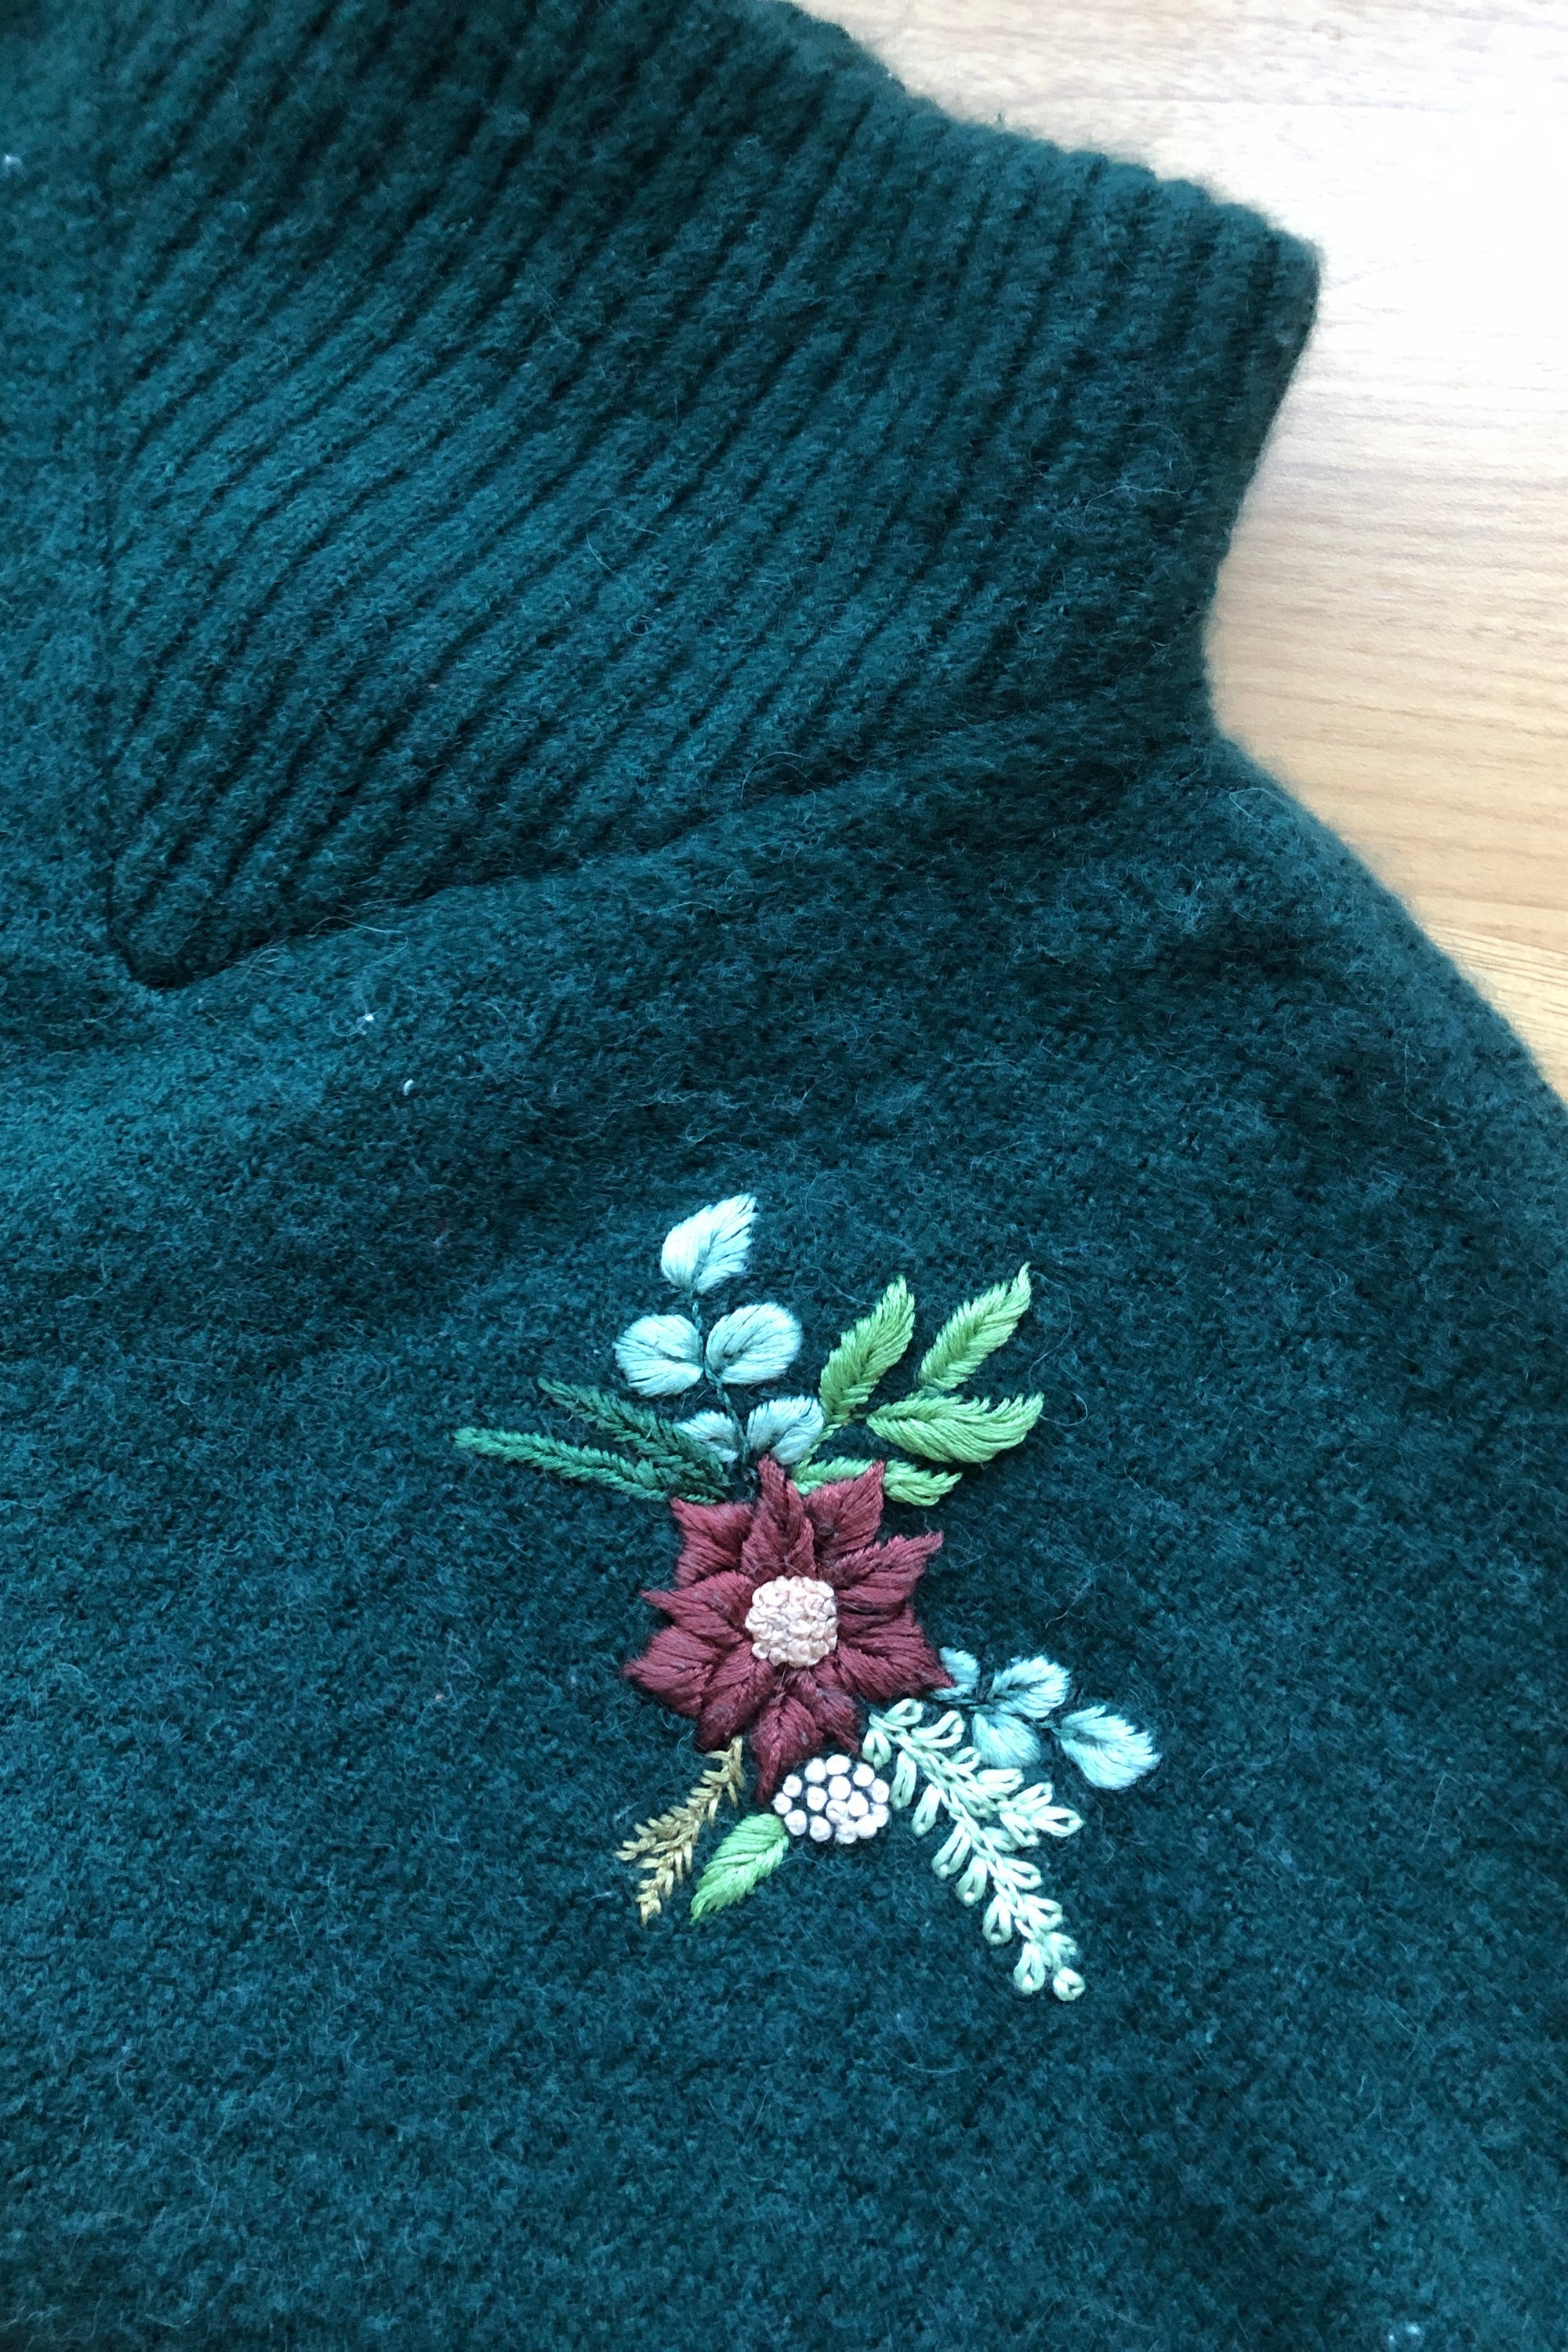 Upcycle Your Clothing with Hand Embroidery / May 11th, 6:30-8:30